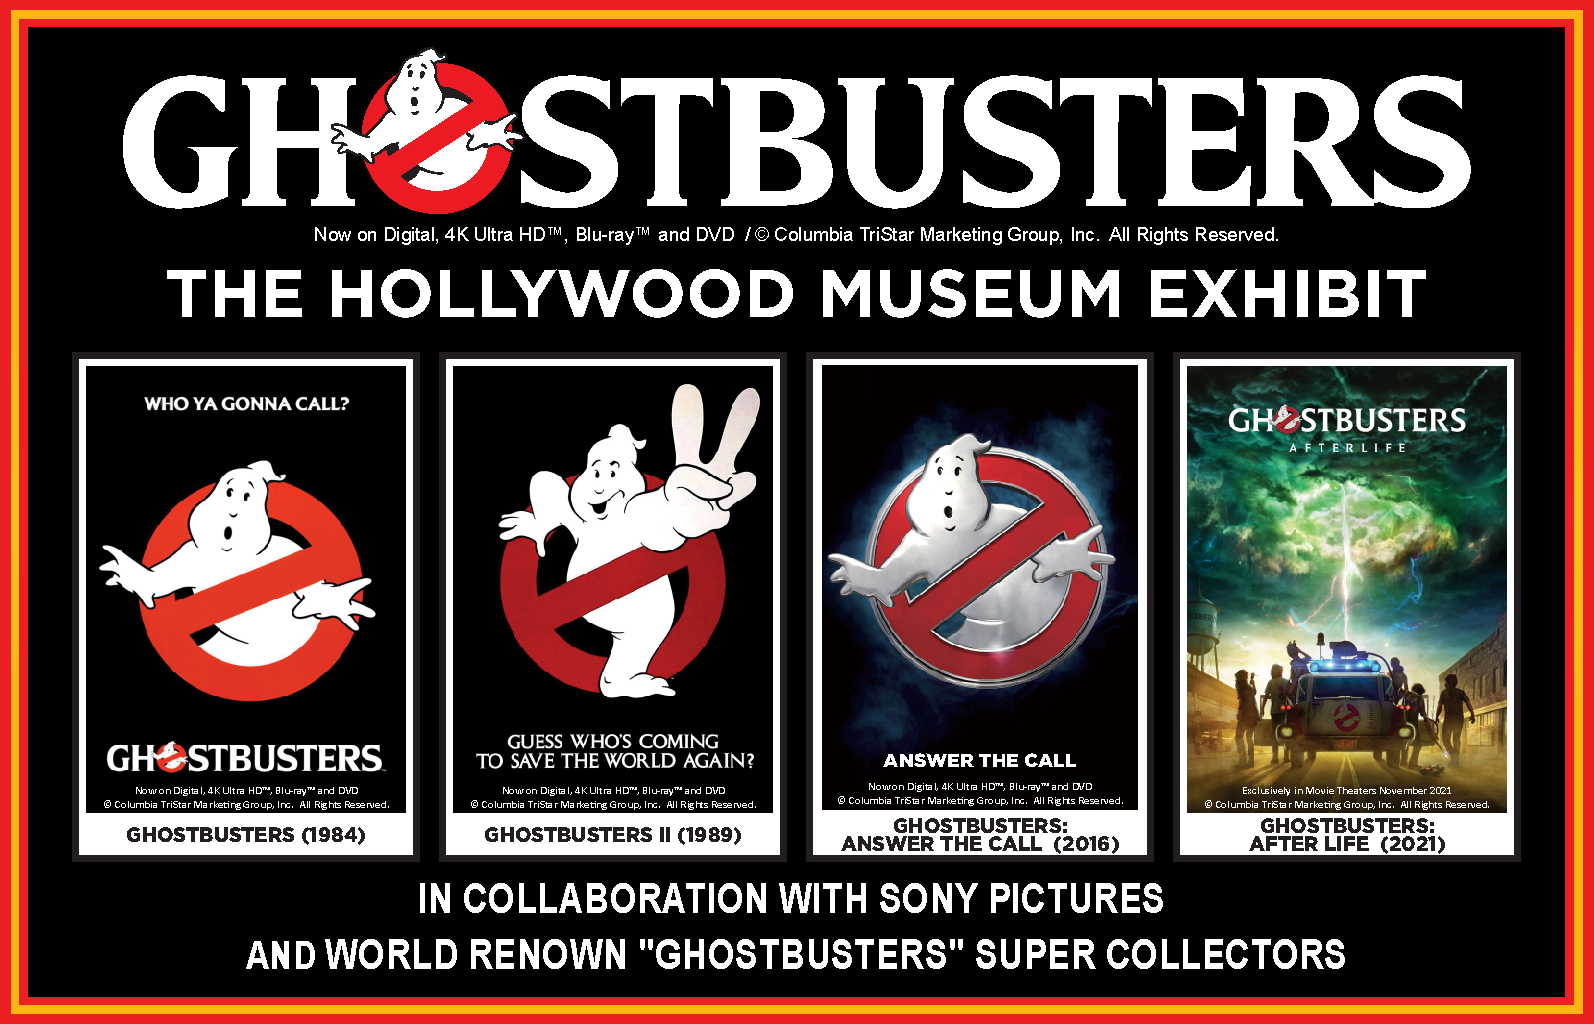 THE GHOSTBUSTERS HOLLYWOOD MUSEUM EXHIBIT - The Hollywood Museum